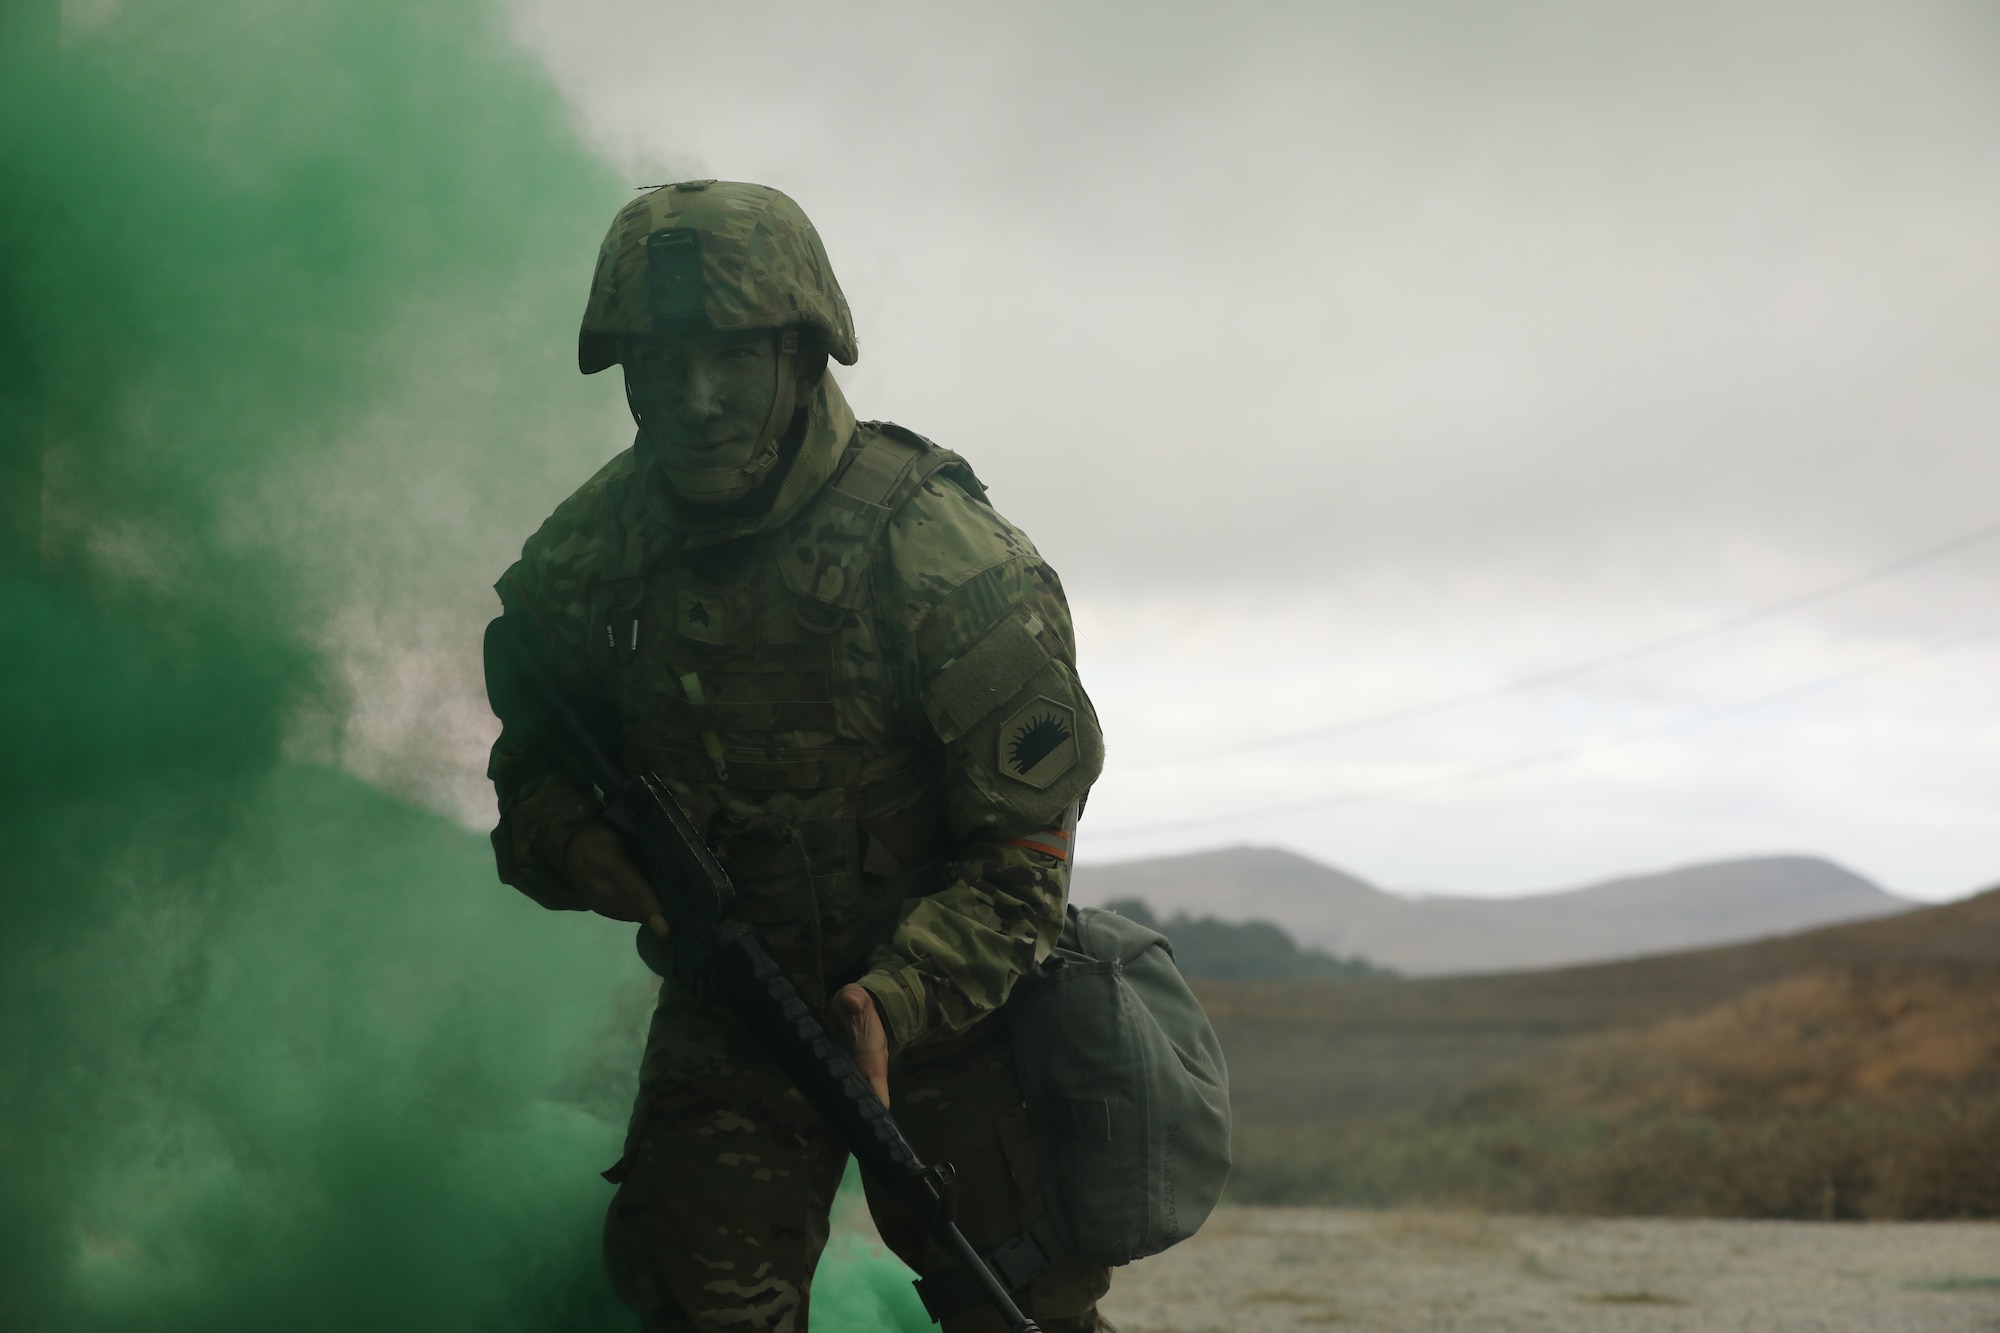 U.S. Army Sgt. Shayan Mirzazadeh, an intelligence analyst with Joint Forces Headquarters, California National Guard, runs through green smoke toward a simulated combat casualty event at Camp San Luis Obispo on Day 3 of the 2024 Best Warrior Competition, Oct. 25, 2023.